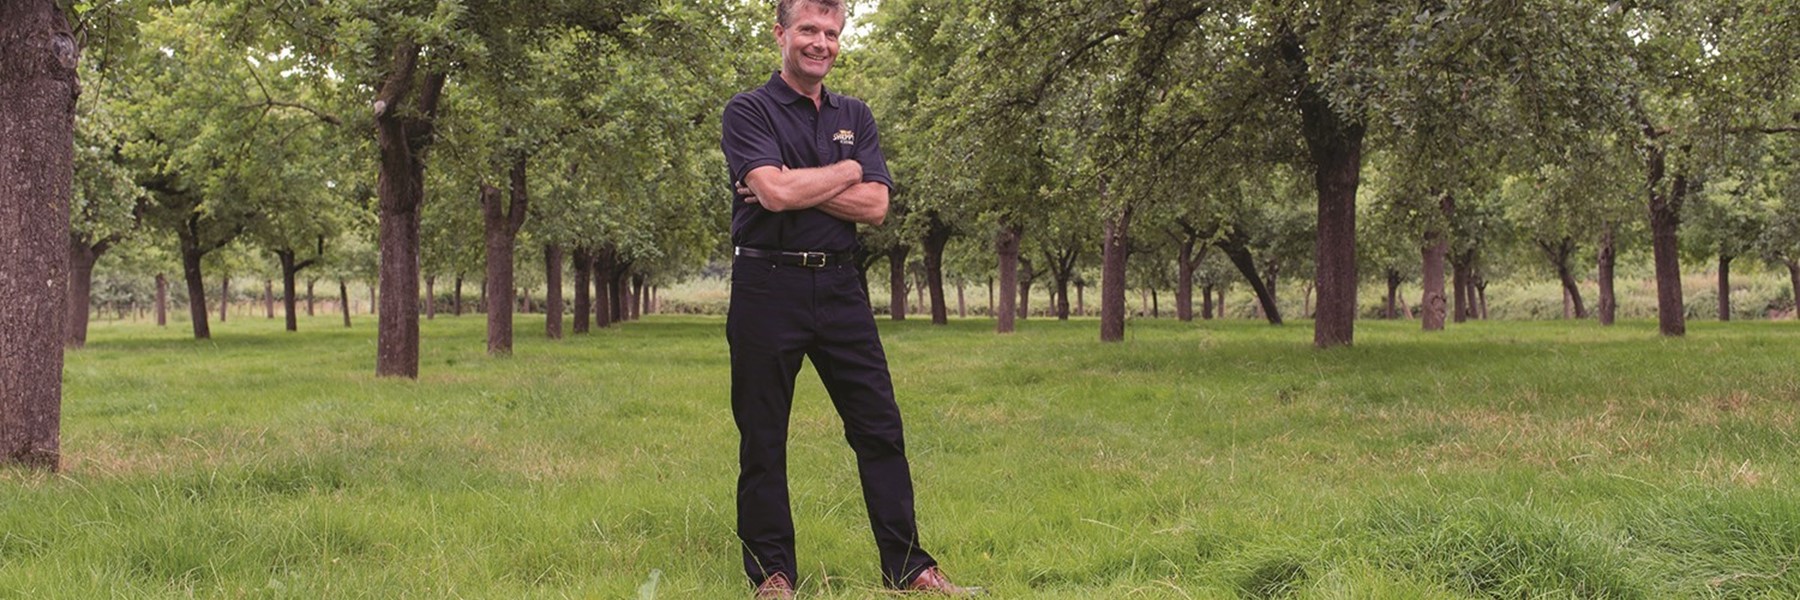 david-sheppy-in-orchard-websize-colour